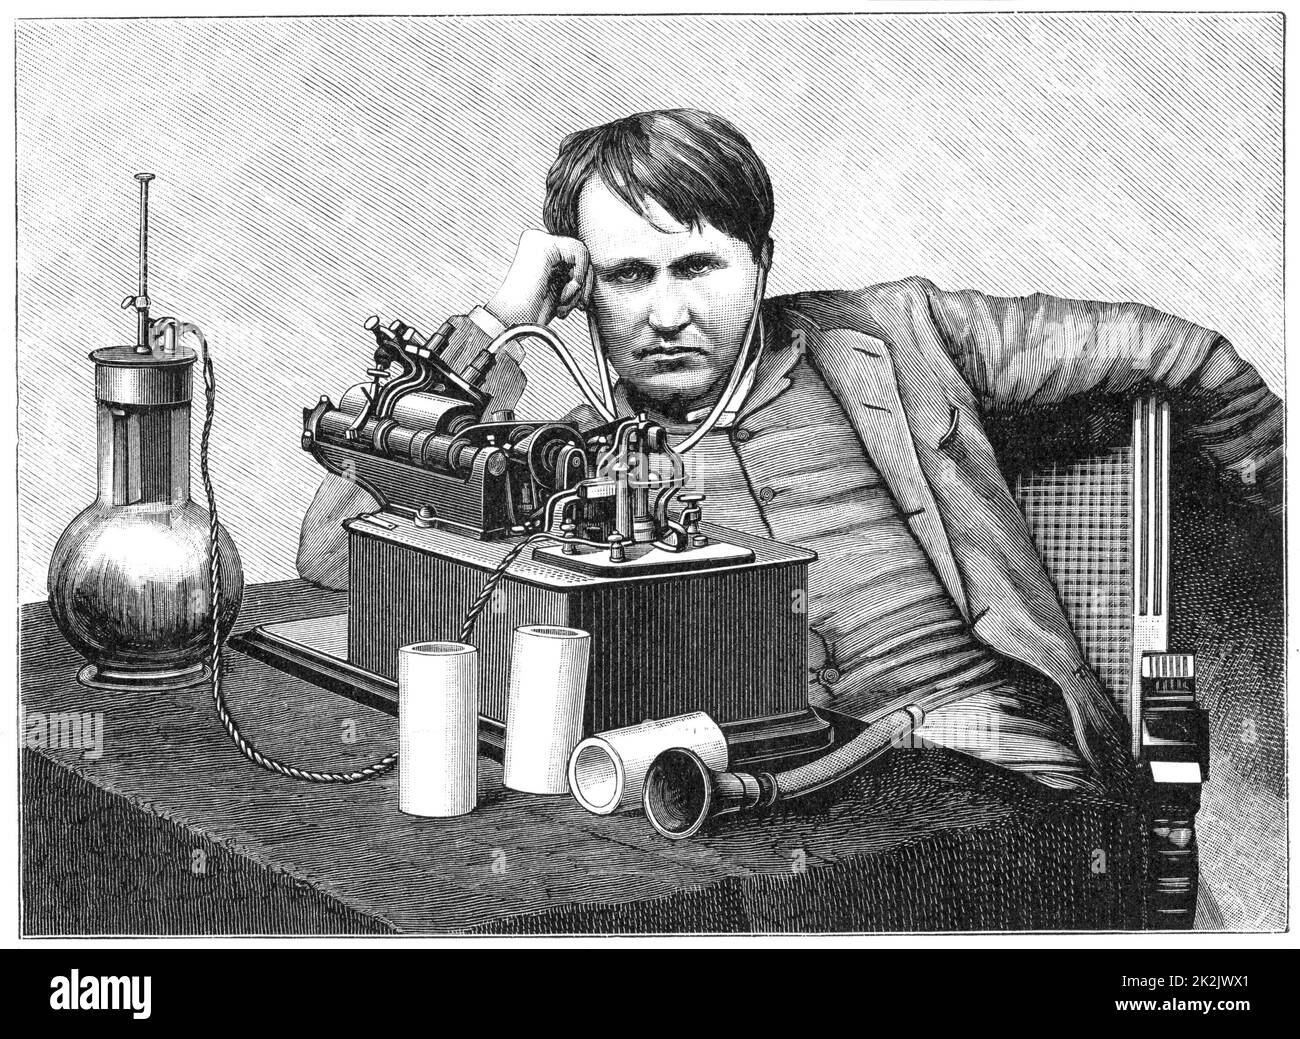 Thomas Alva Edison (1847-1931) American inventor, listening to a recording on his phonograph. This is an electric model powered by a bichromate cell (left), a form of wet battery. Engraving c1895 Stock Photo